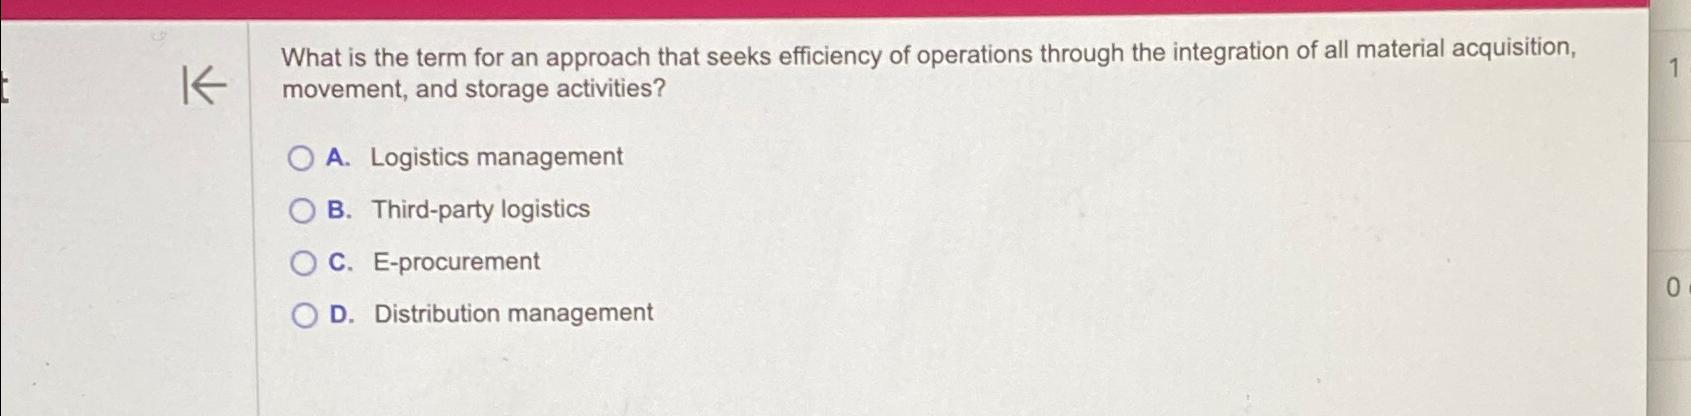 K What is the term for an approach that seeks efficiency of operations through the integration of all